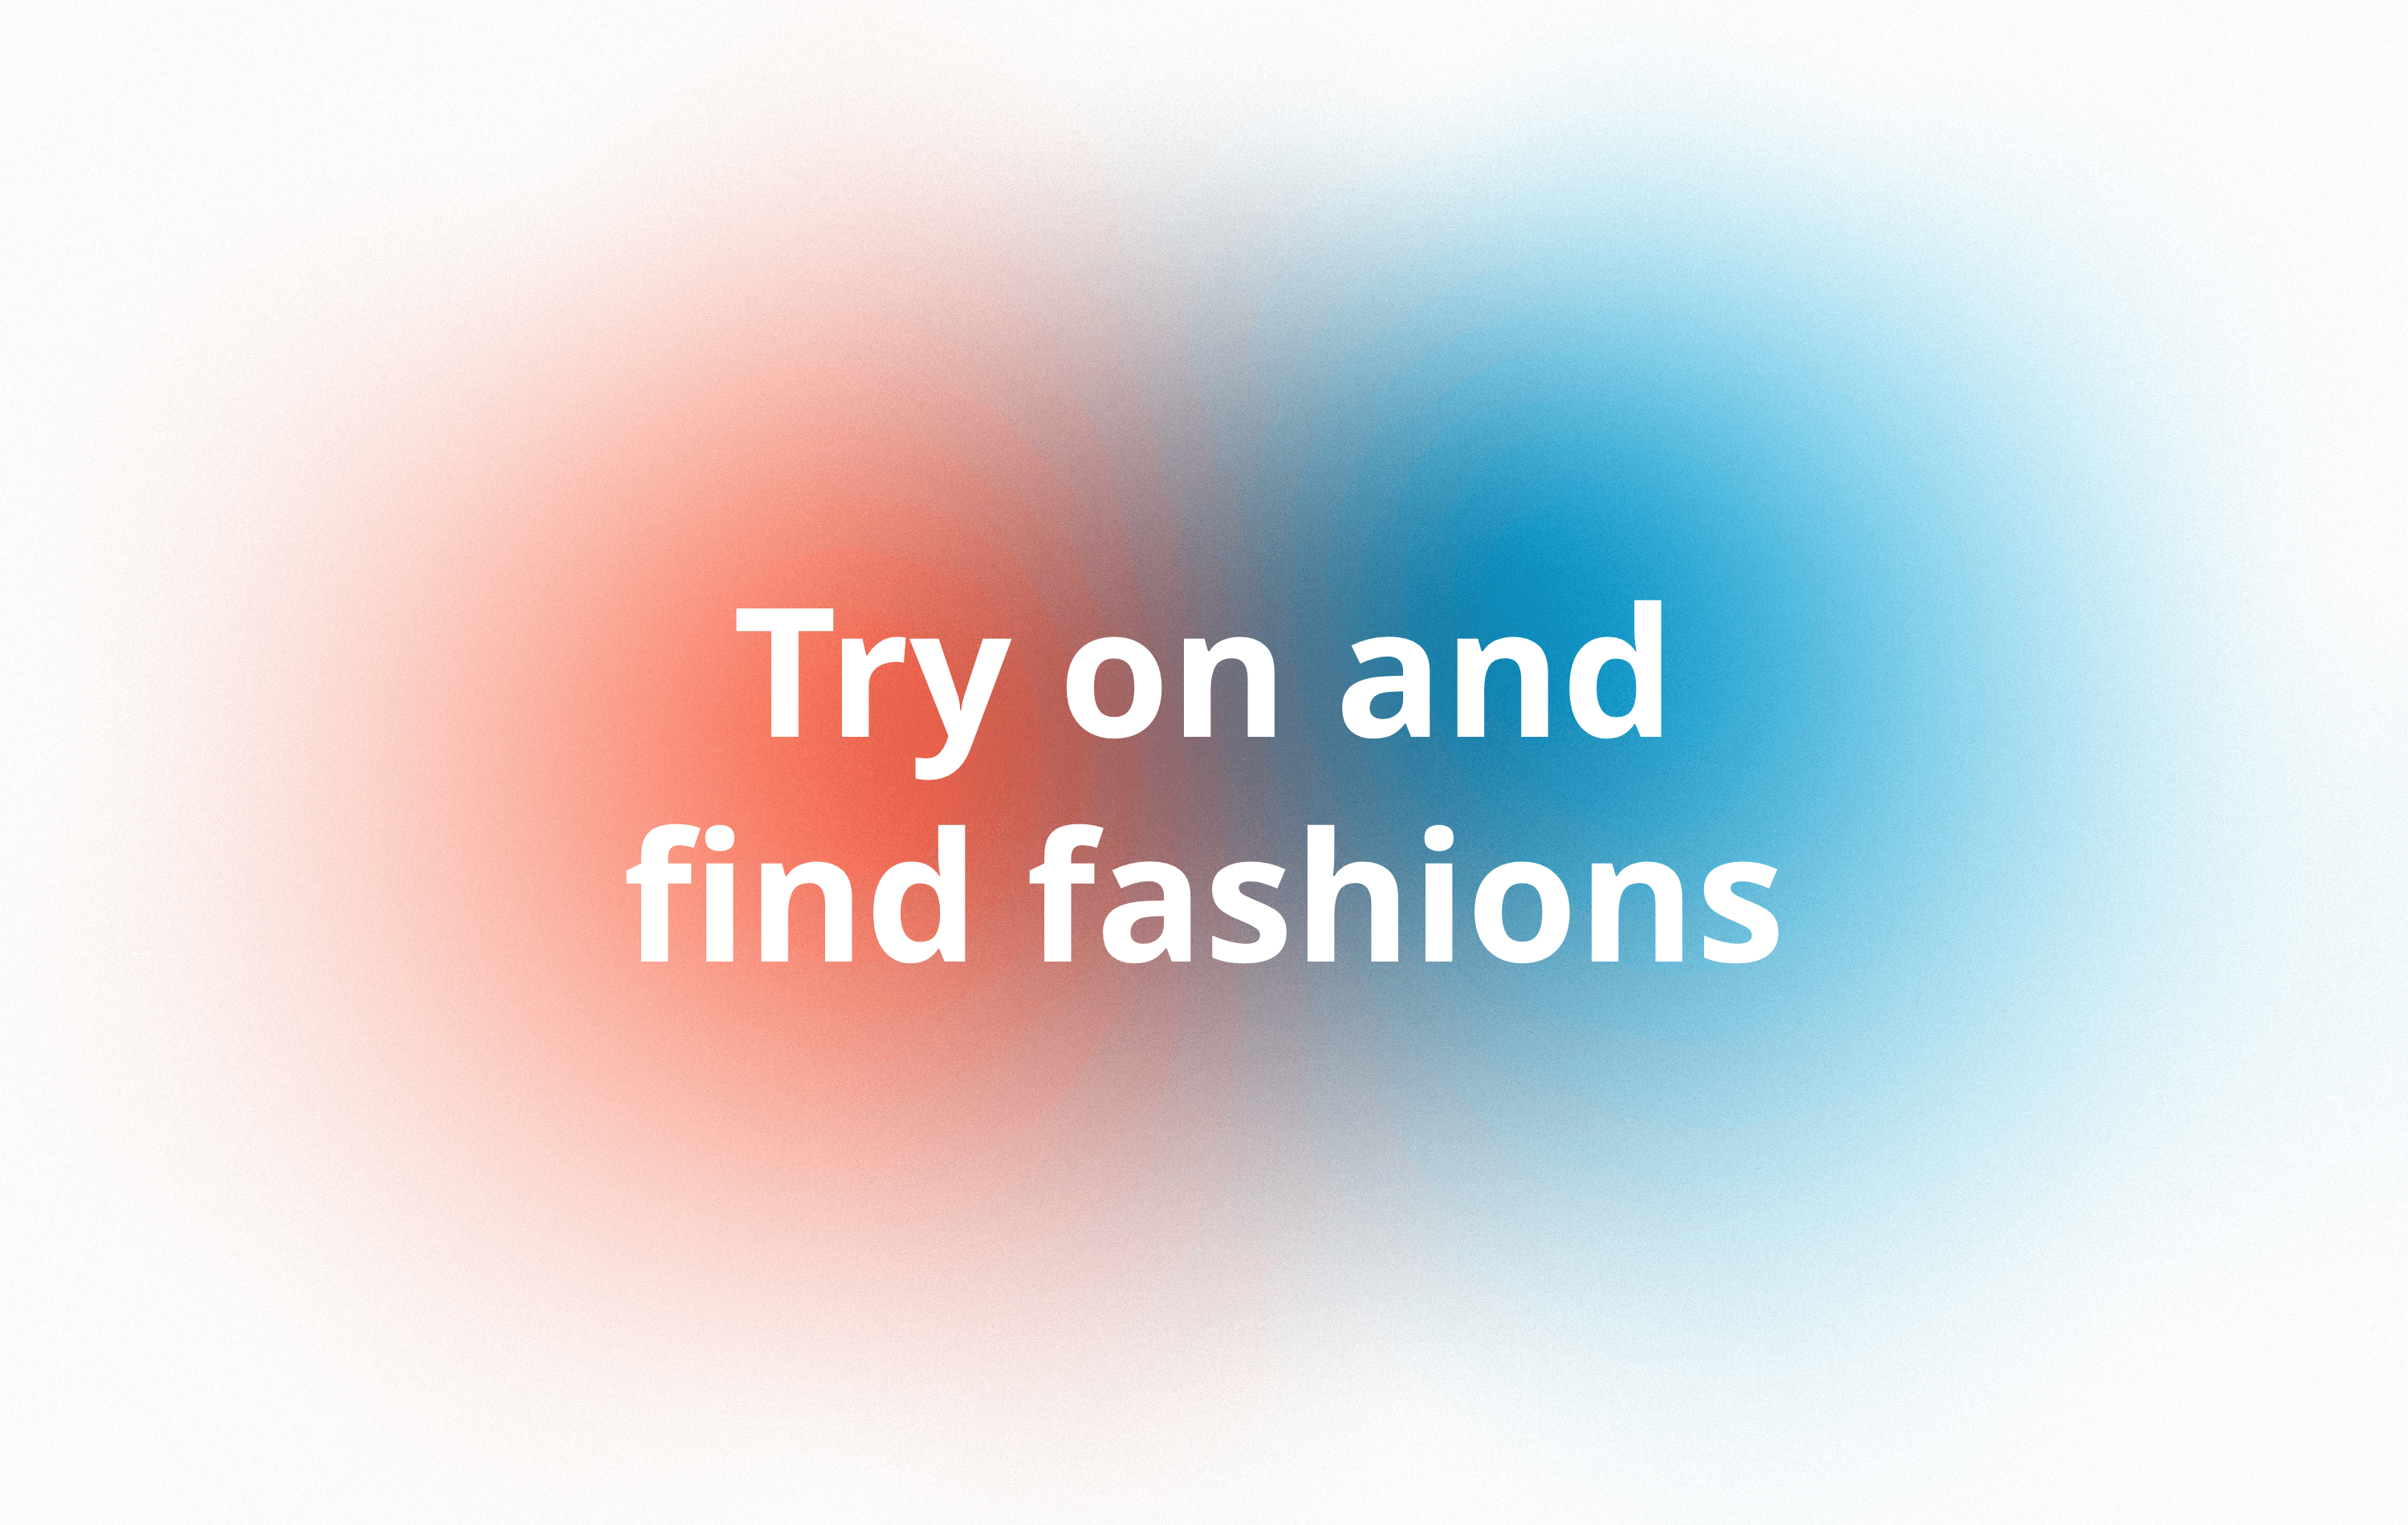 Try on and find fashions